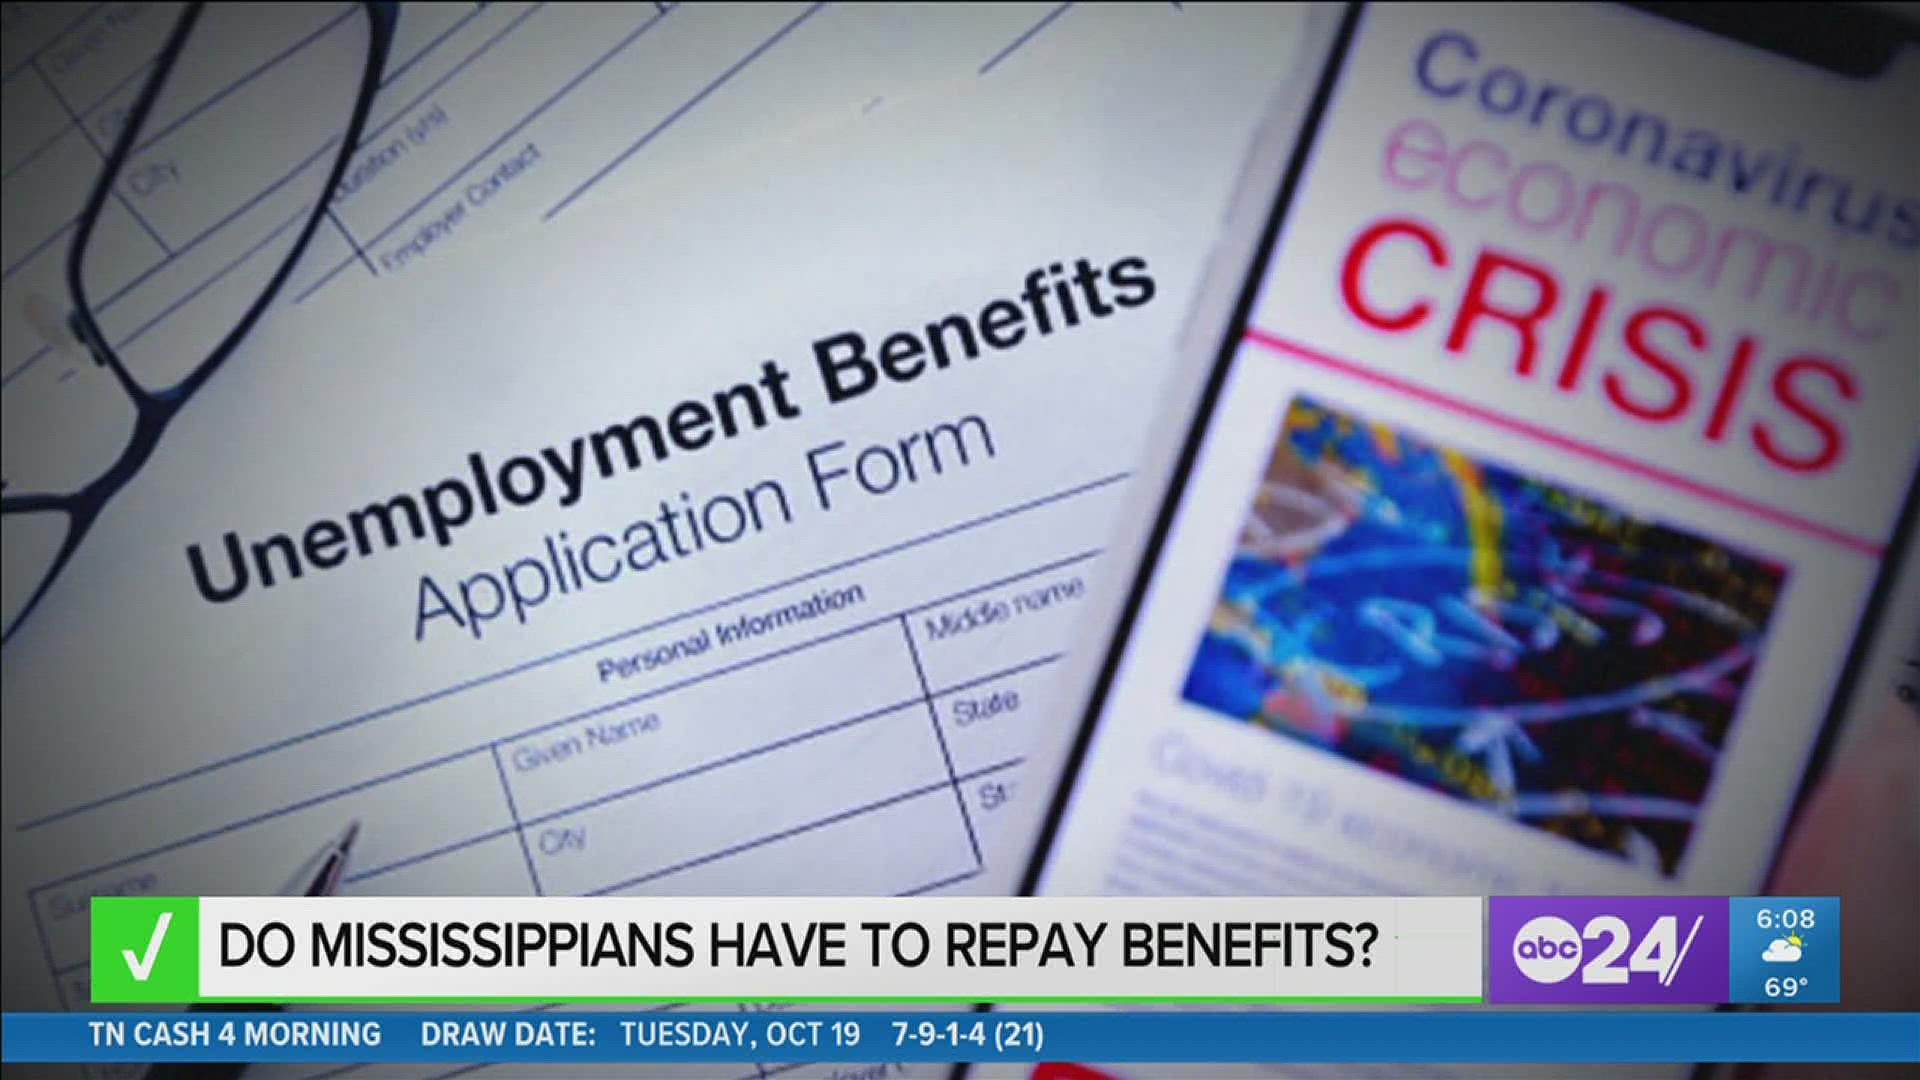 Regardless if the state made an error or the applicant made an error, the Mississippi Department of Employment Services said the money has to be paid back.